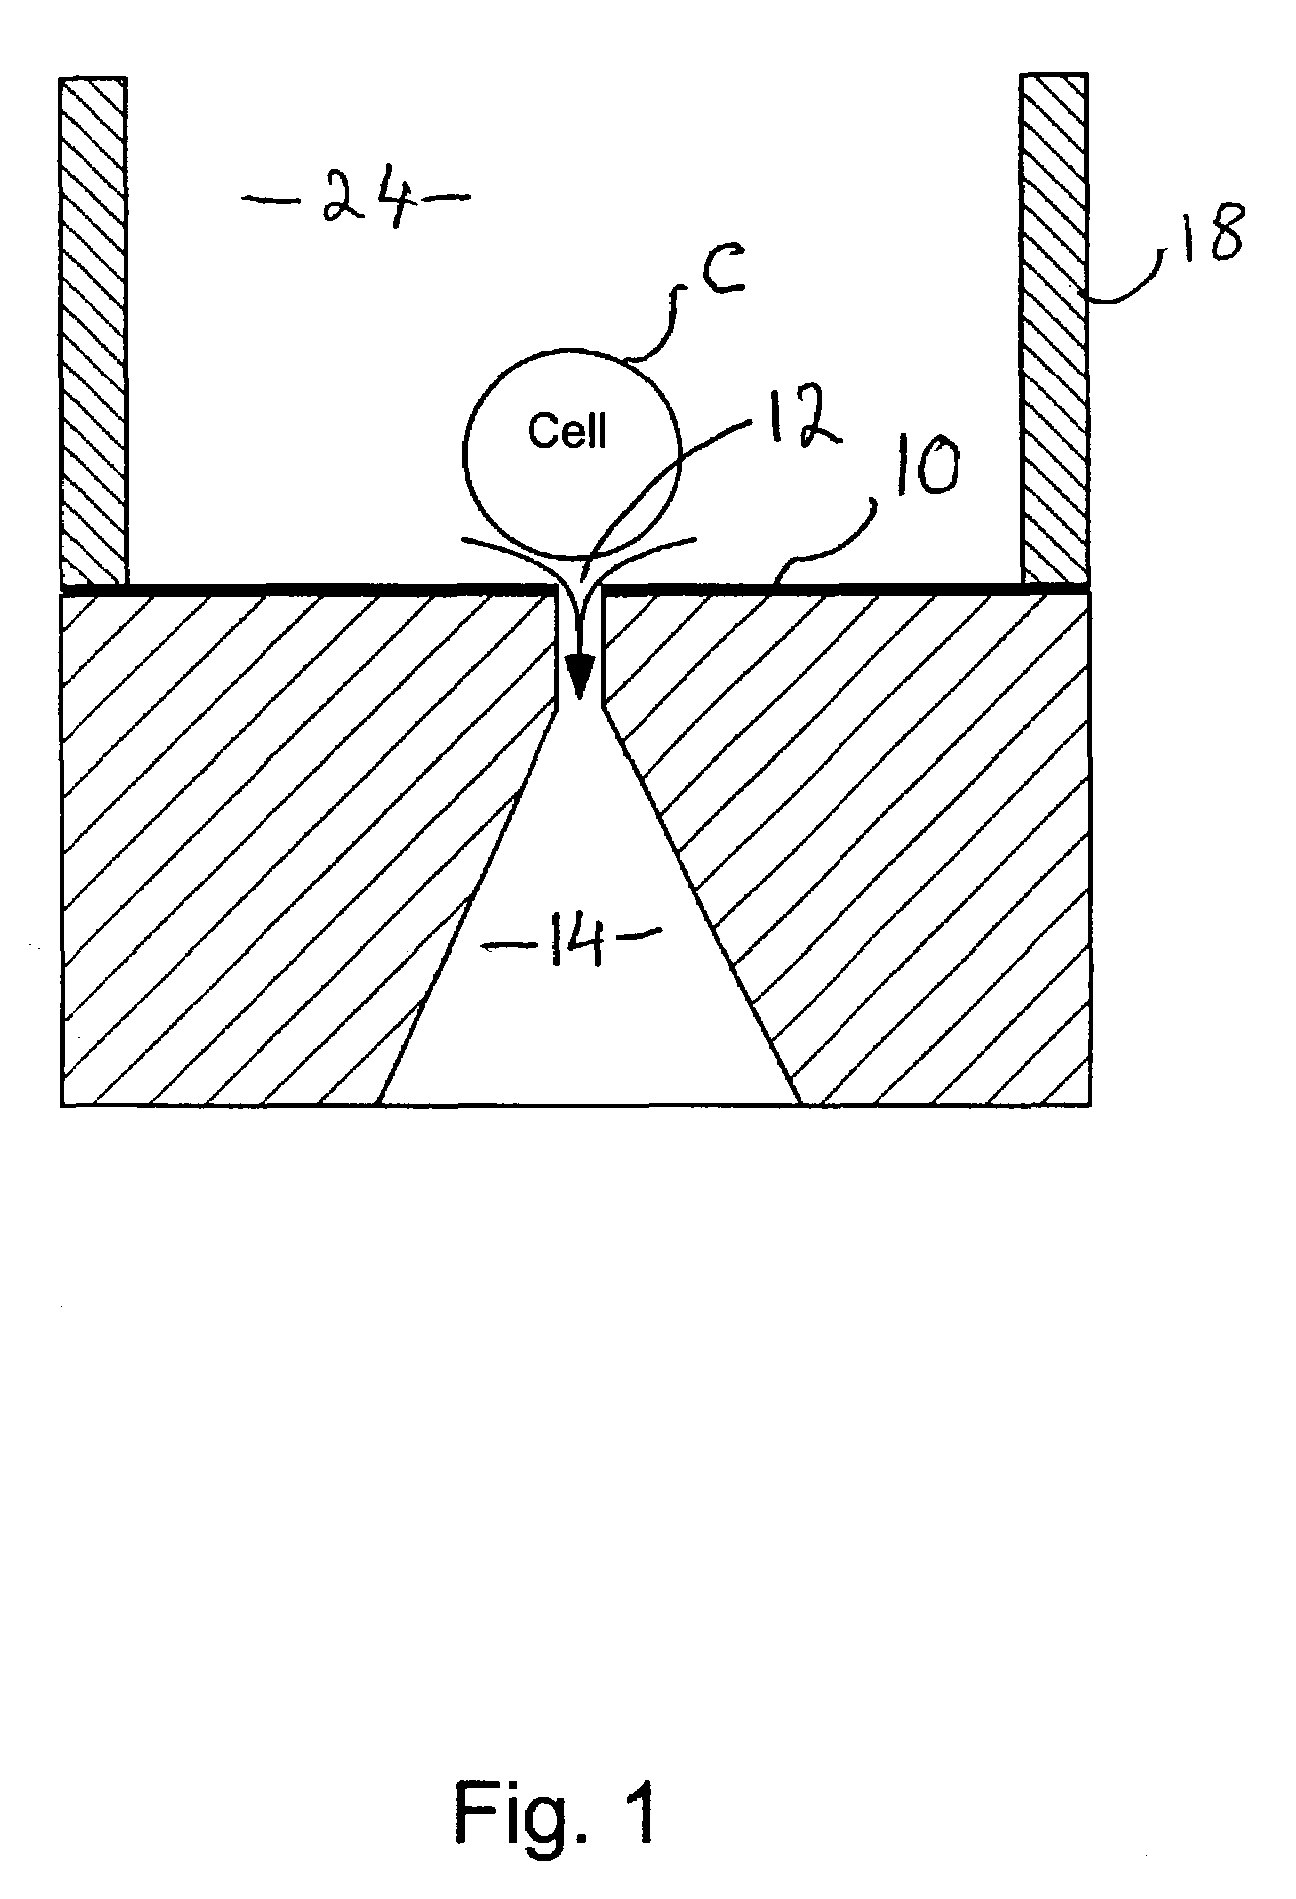 Detachable cell-delivery system for patch-clamp unit